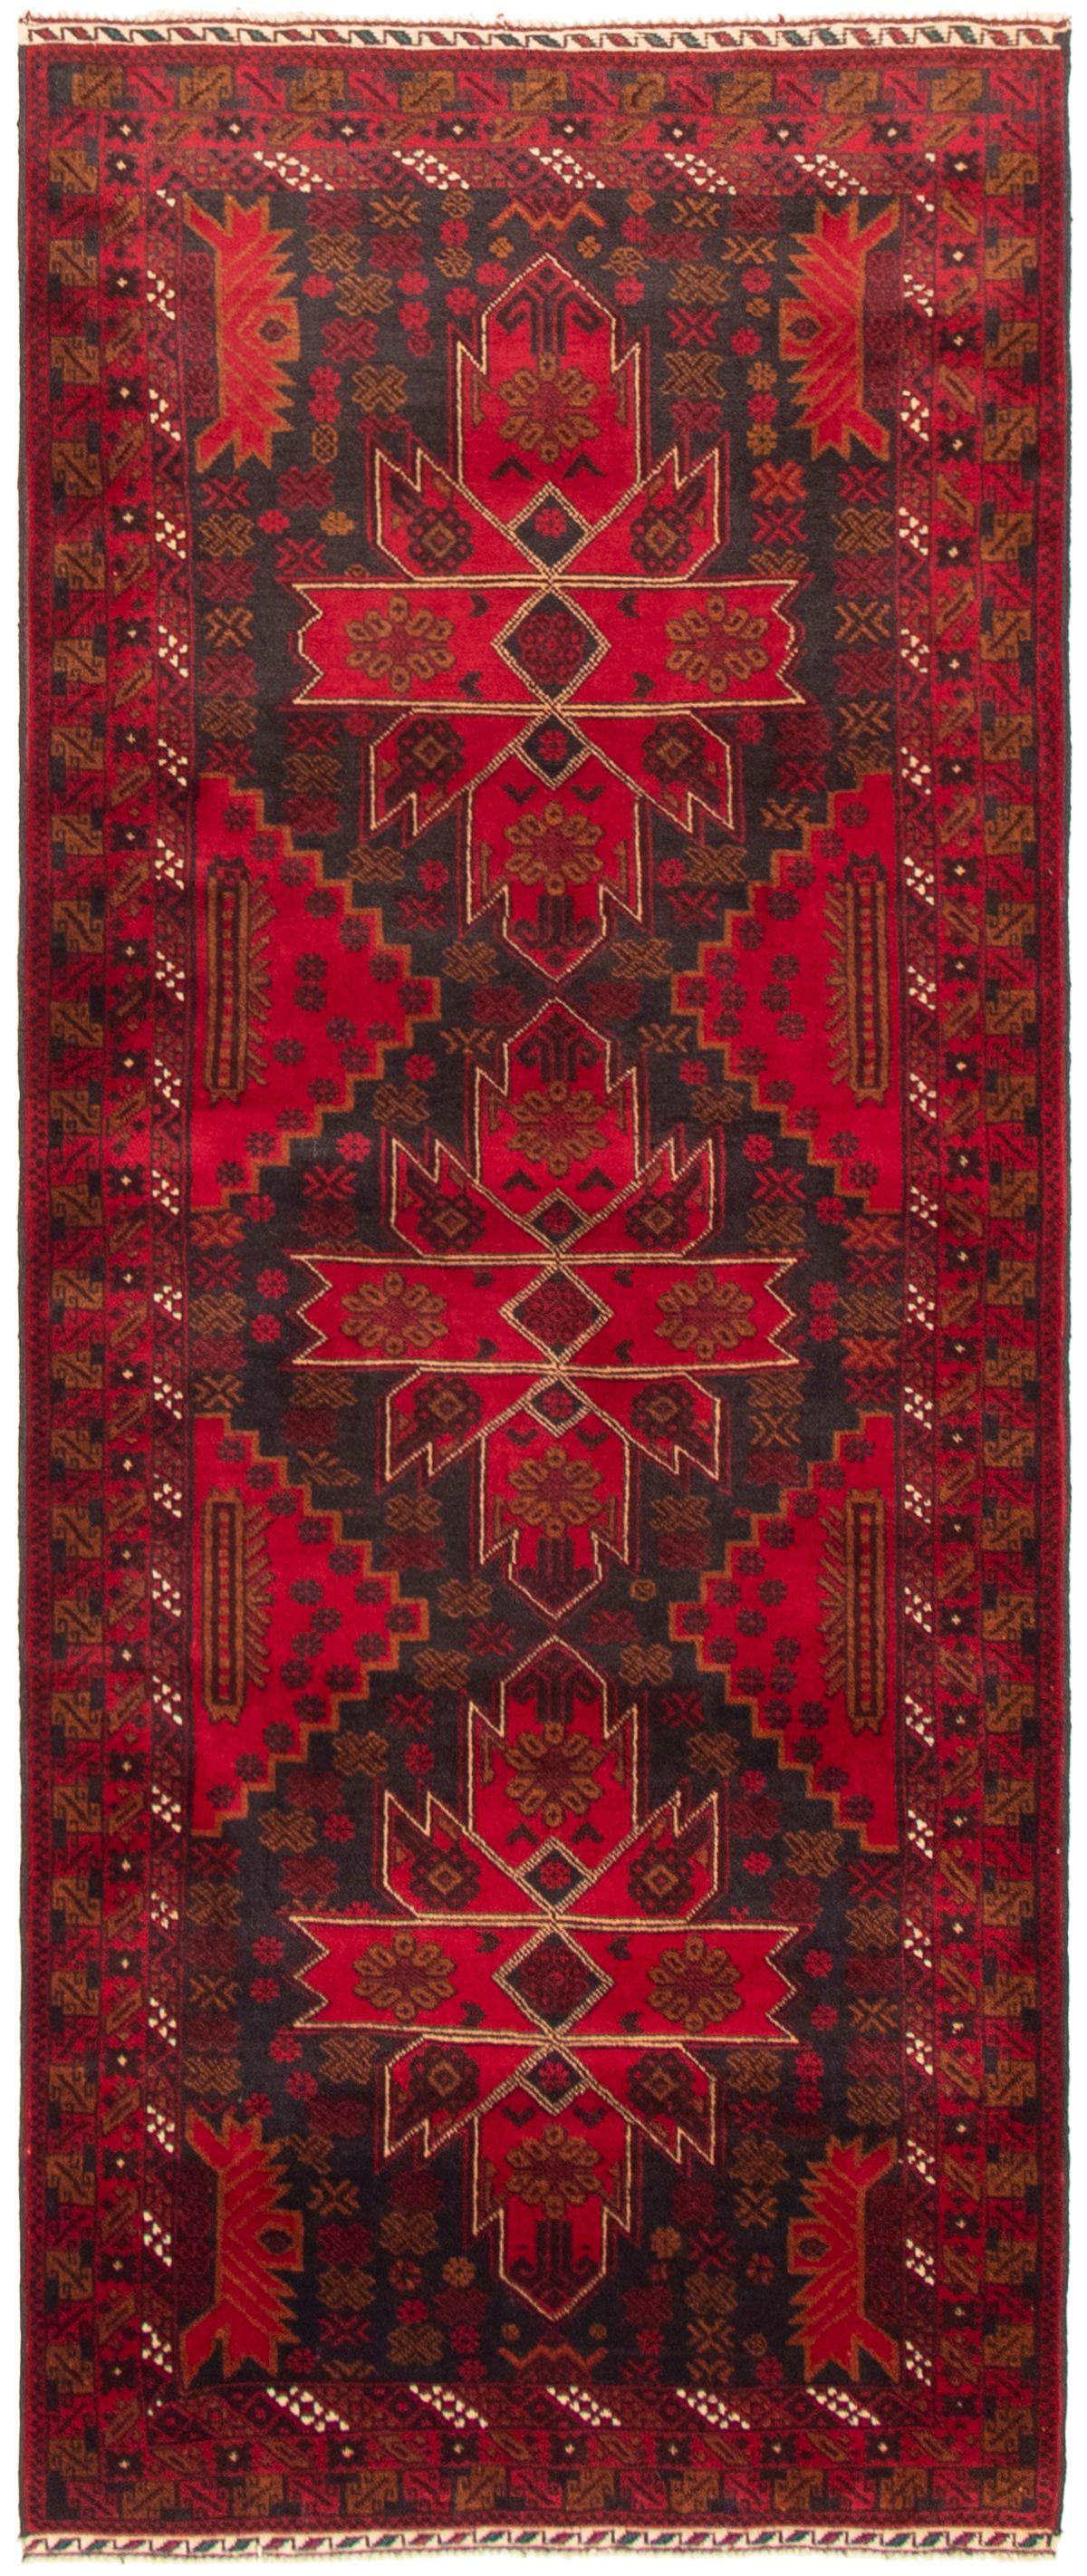 Hand-knotted Rizbaft Red Wool Rug 2'11" x 6'9" Size: 2'11" x 6'9"  